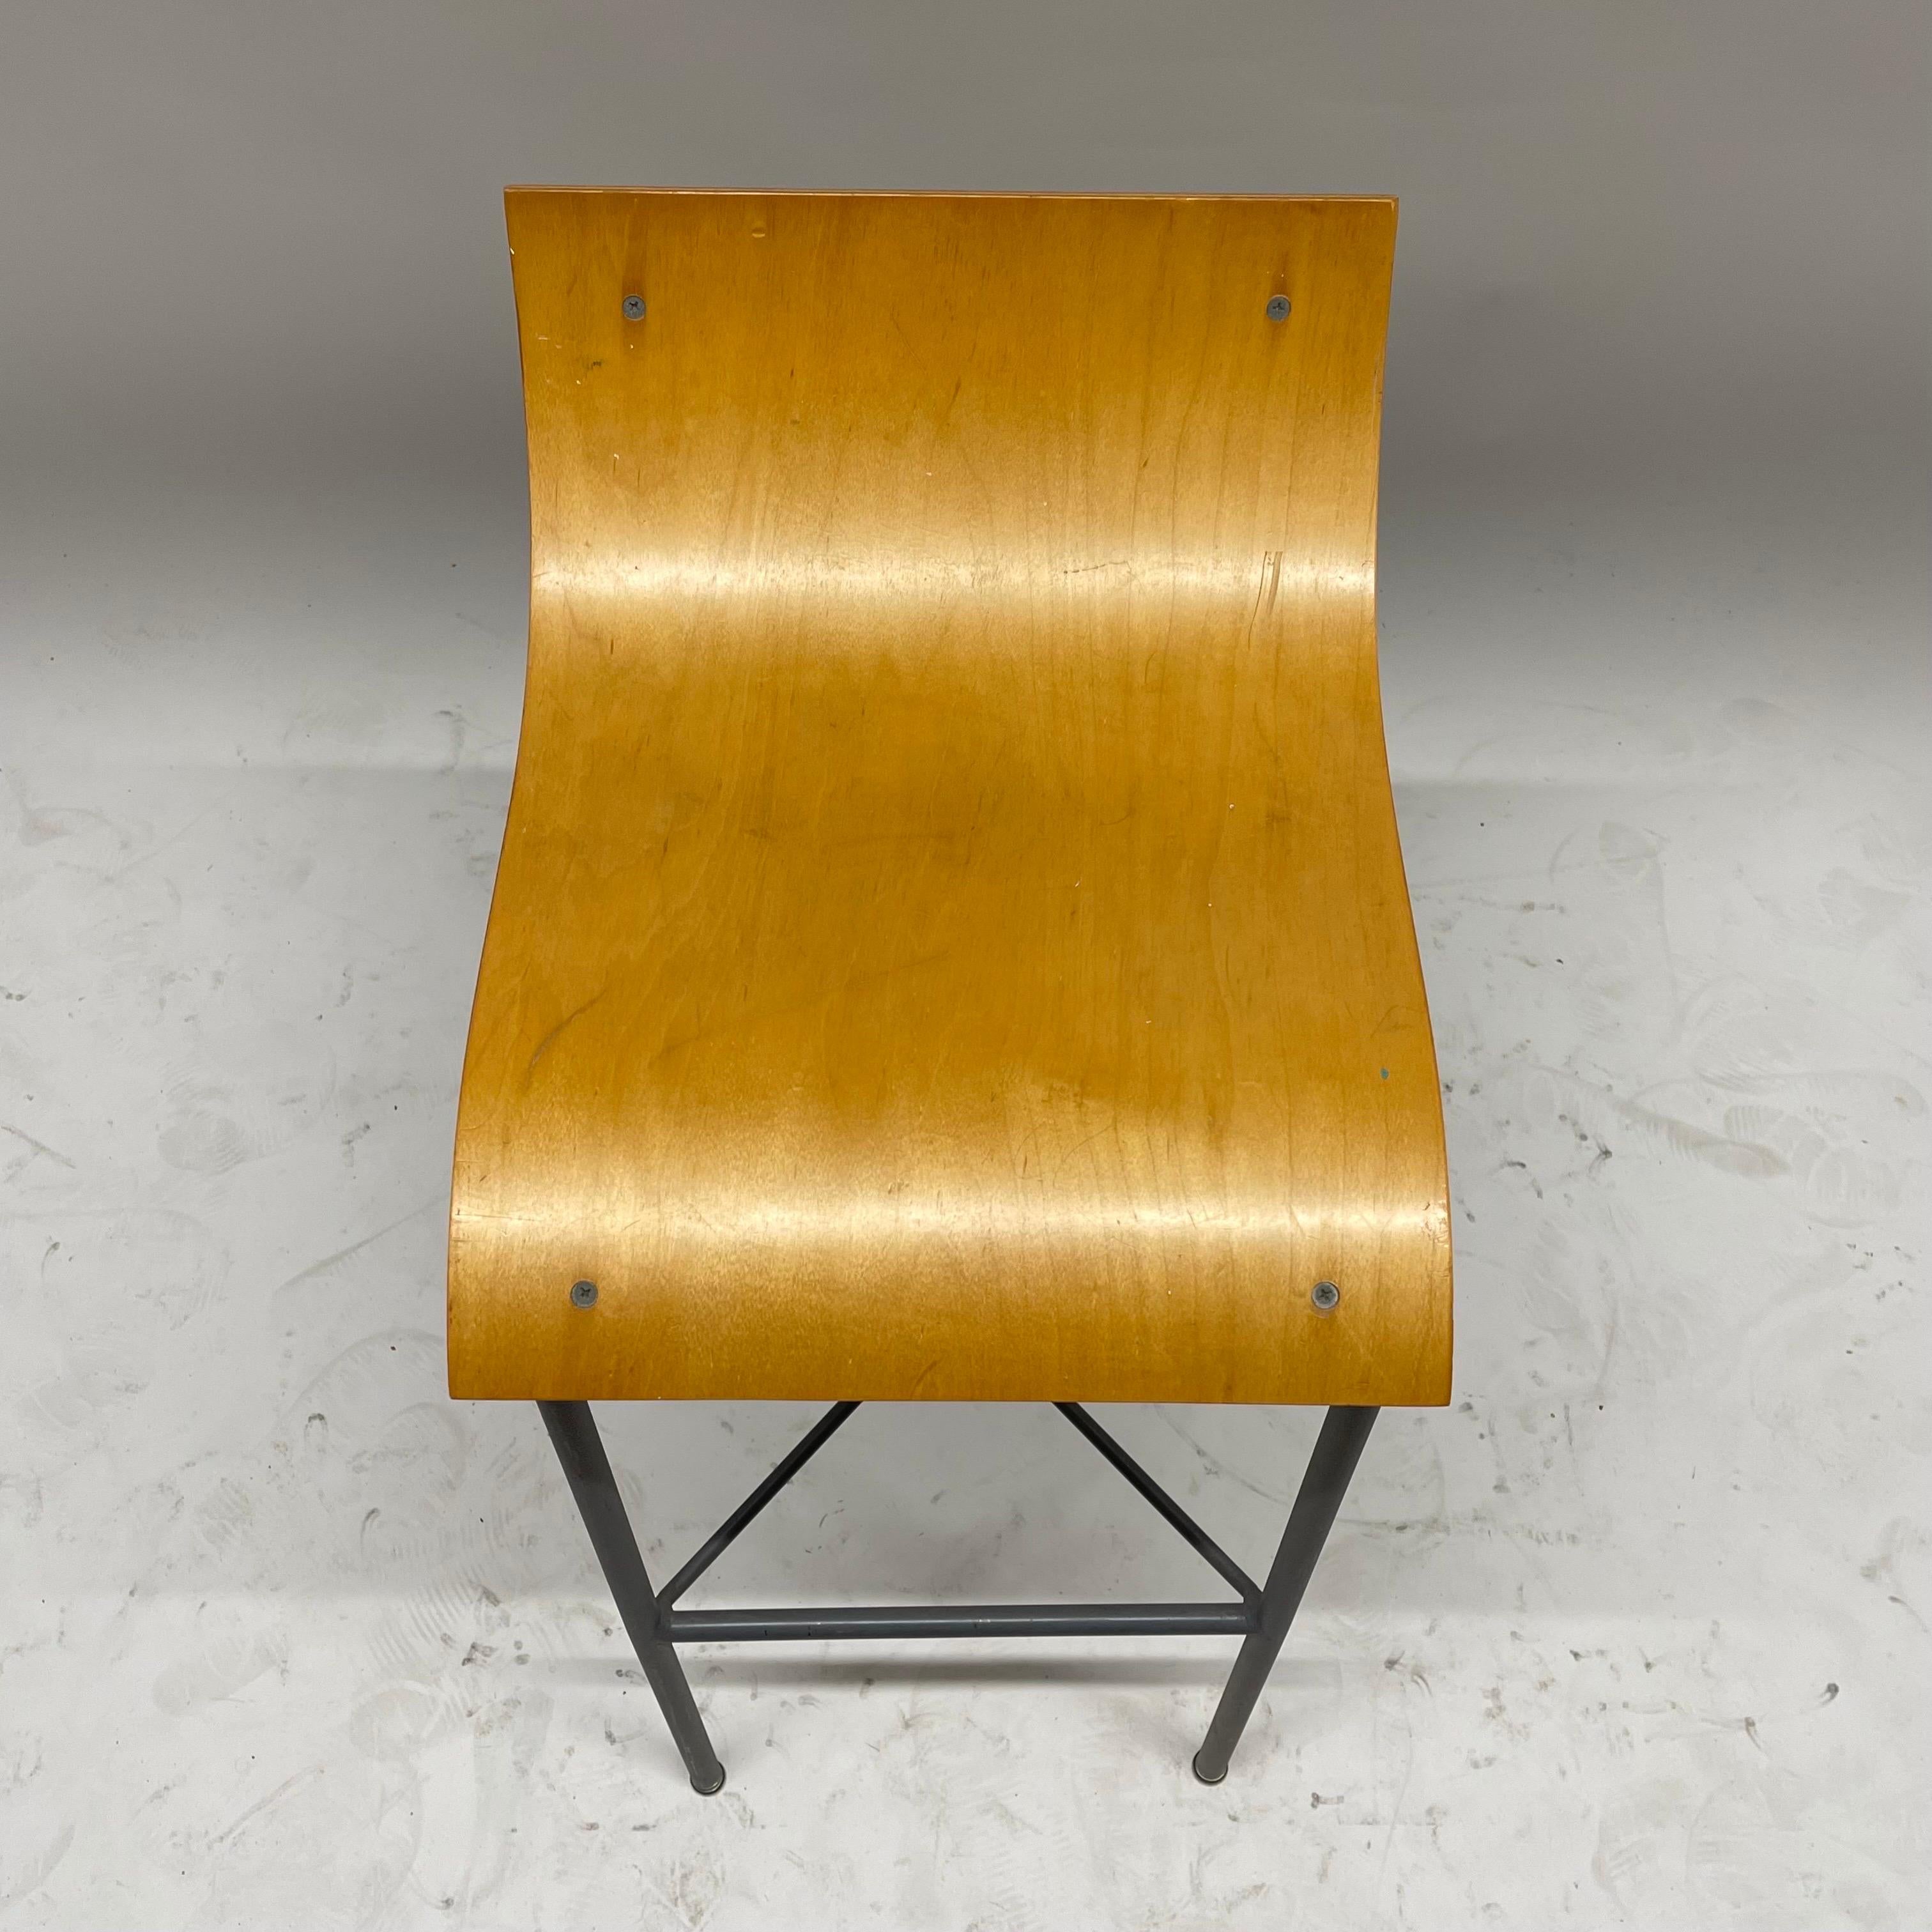 Pair of Post Modern Sculptural Steel and Bent Plywood Bar Stools, circa 1980s For Sale 2